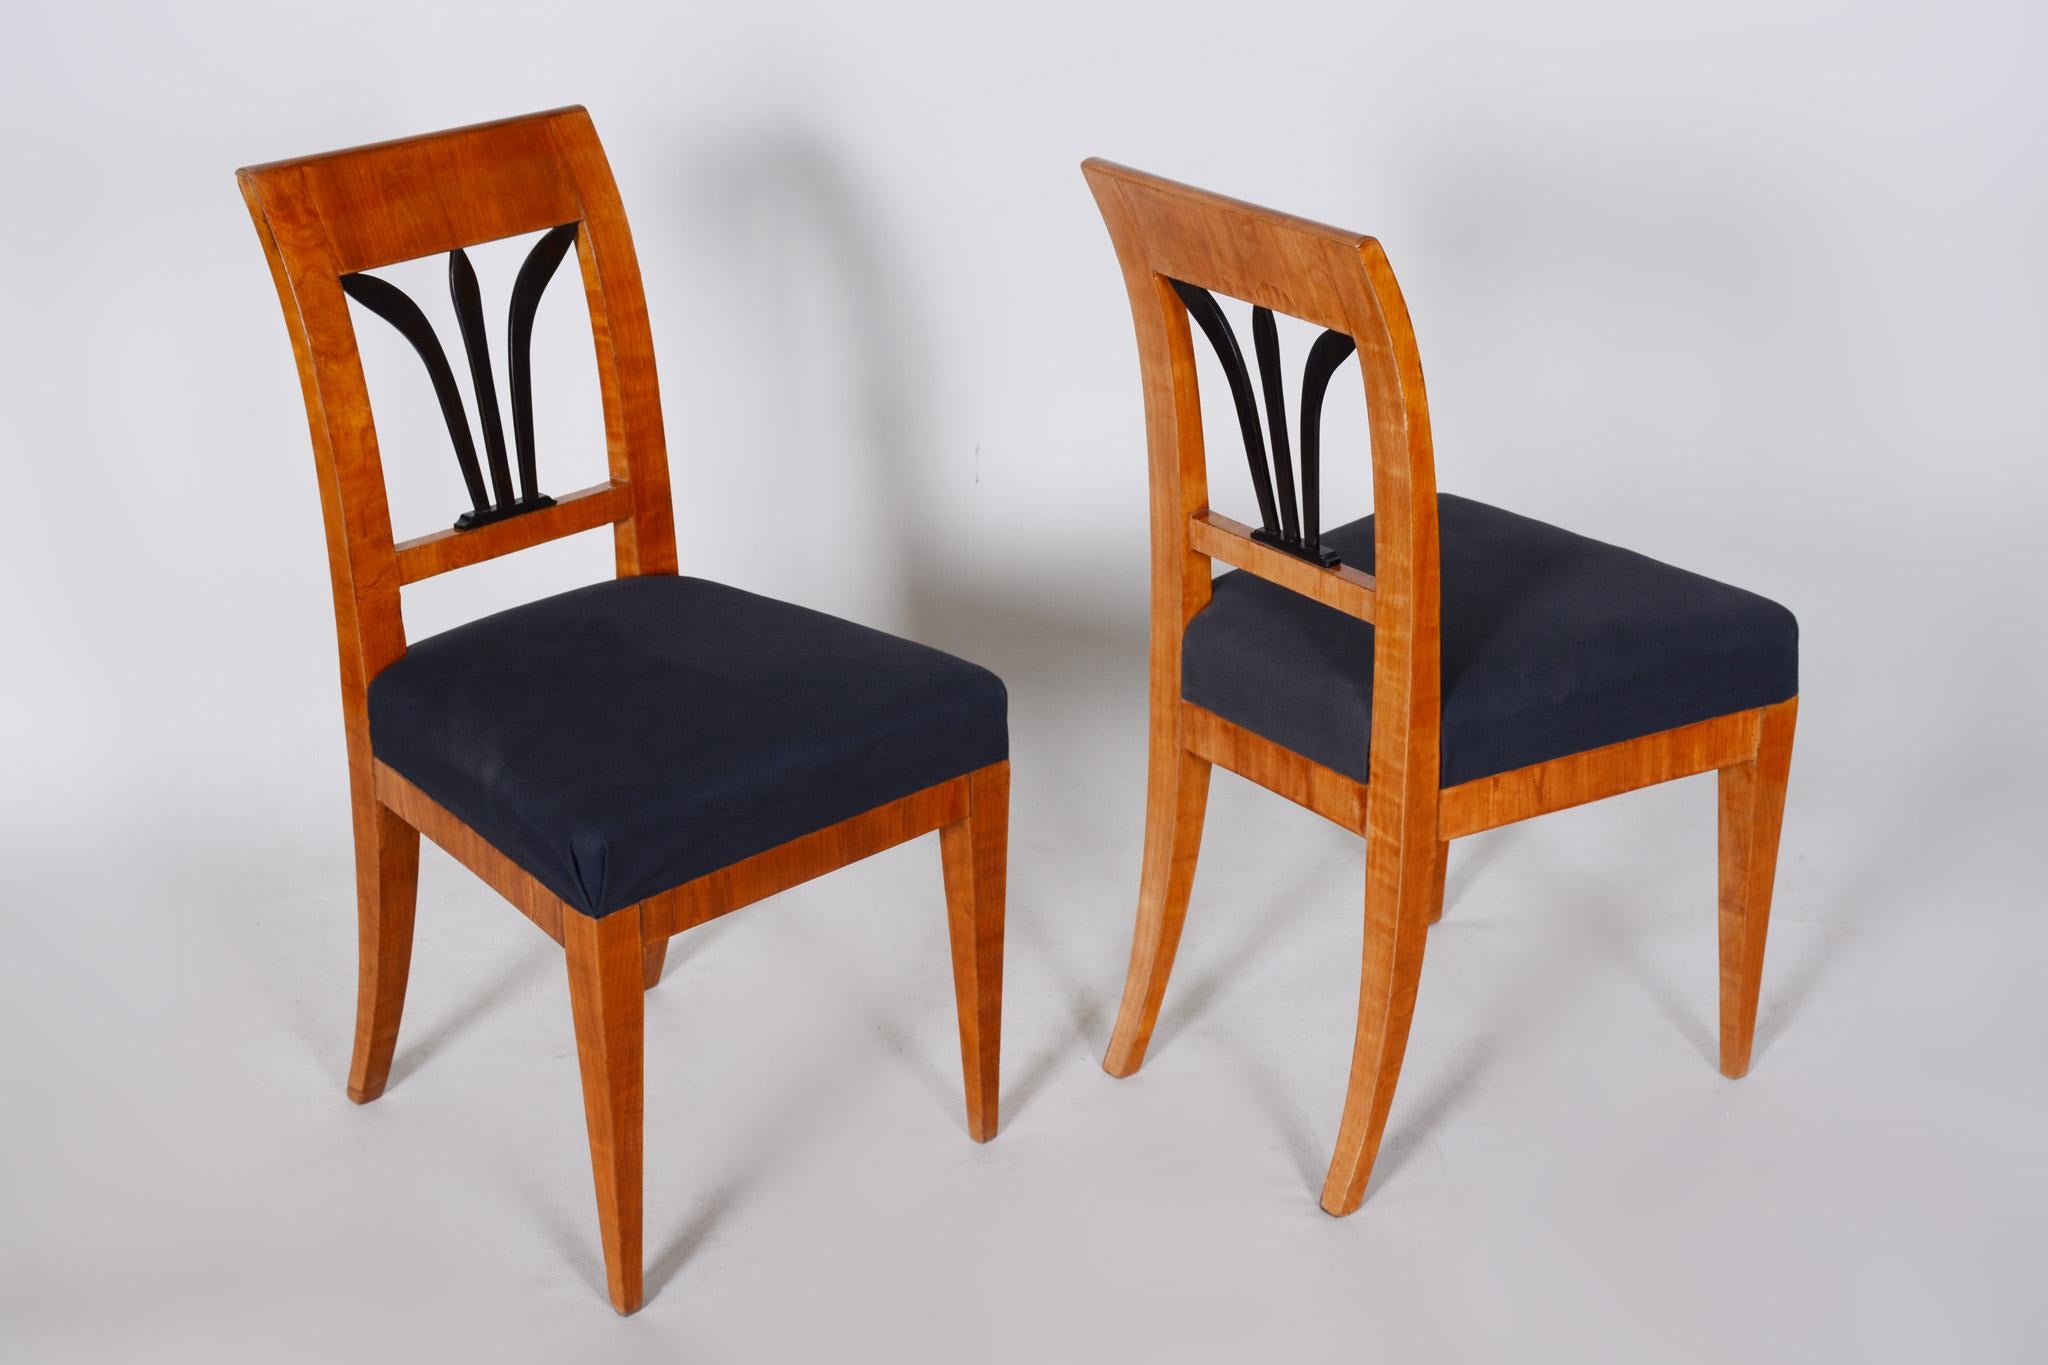 Fabric Pair of Biedermeier Dining Chairs Made in Czechia circa 1830s, Restored Cherry For Sale